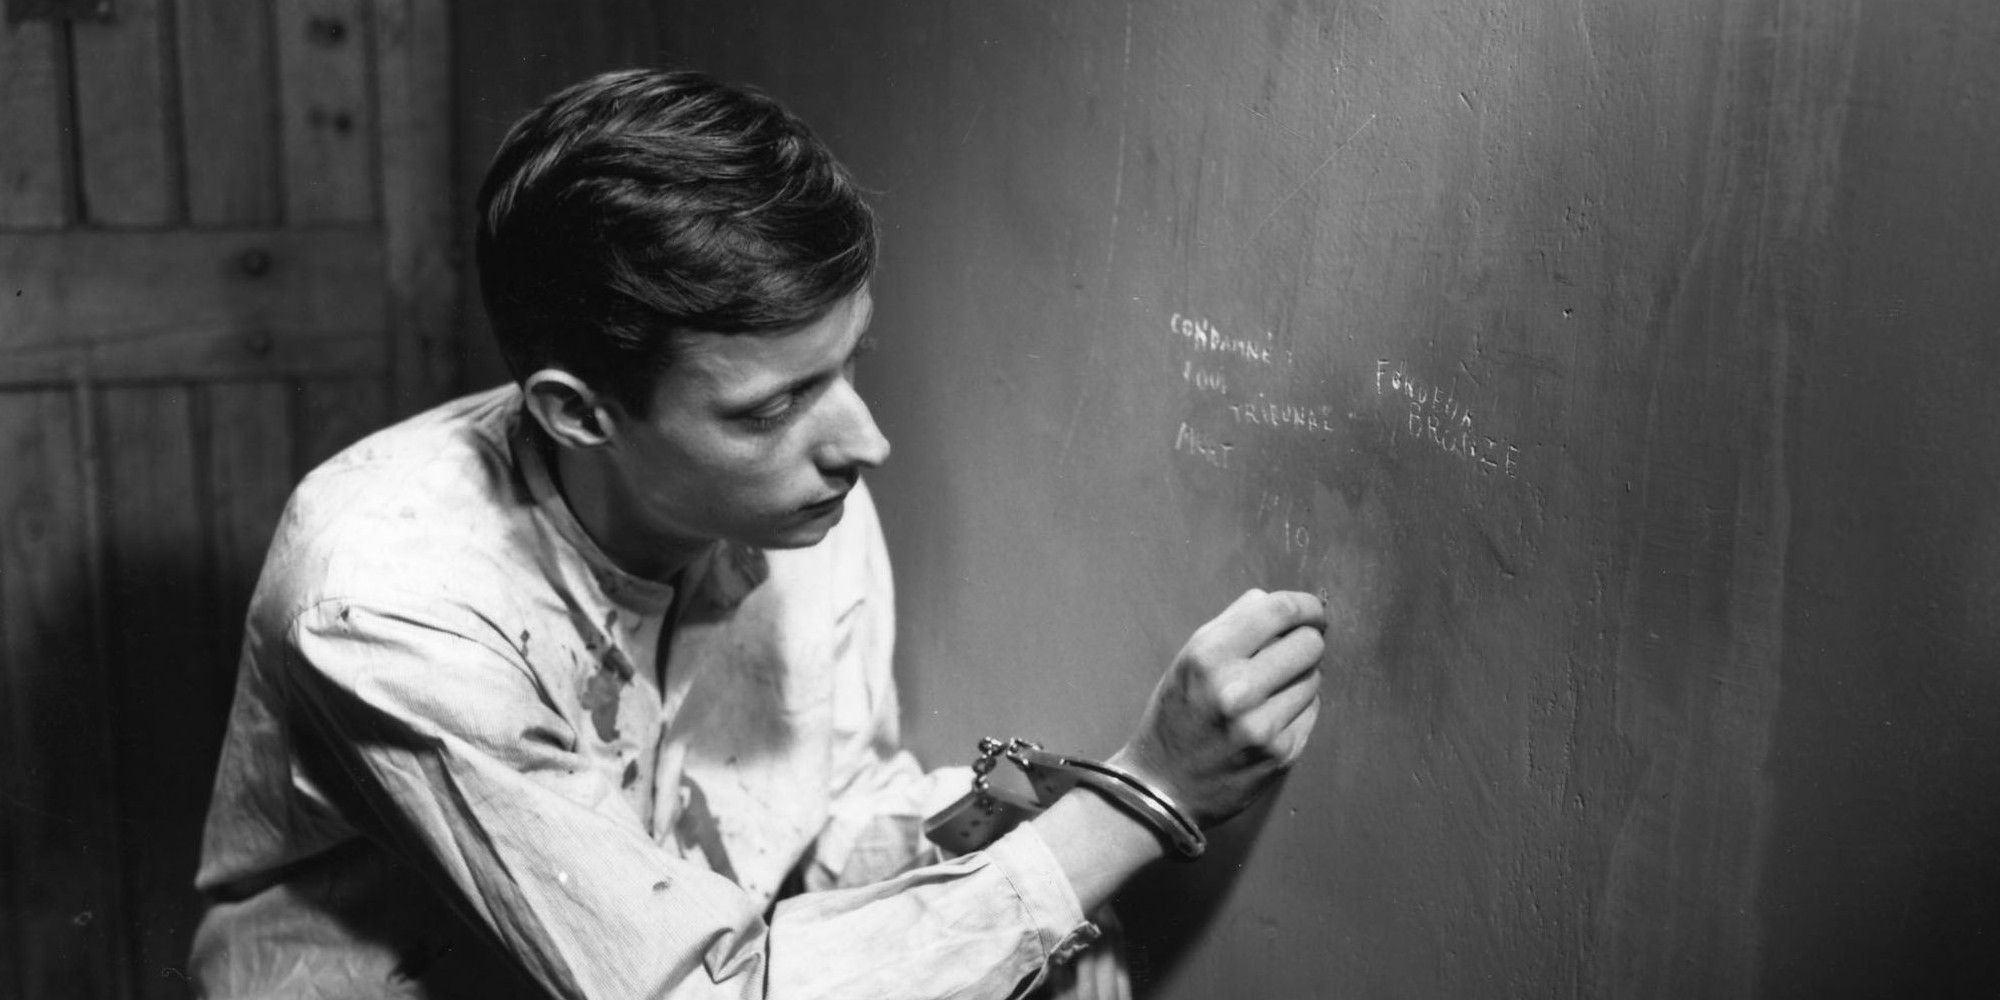 Prisoner writing on the wall in A Man Escaped (1956)